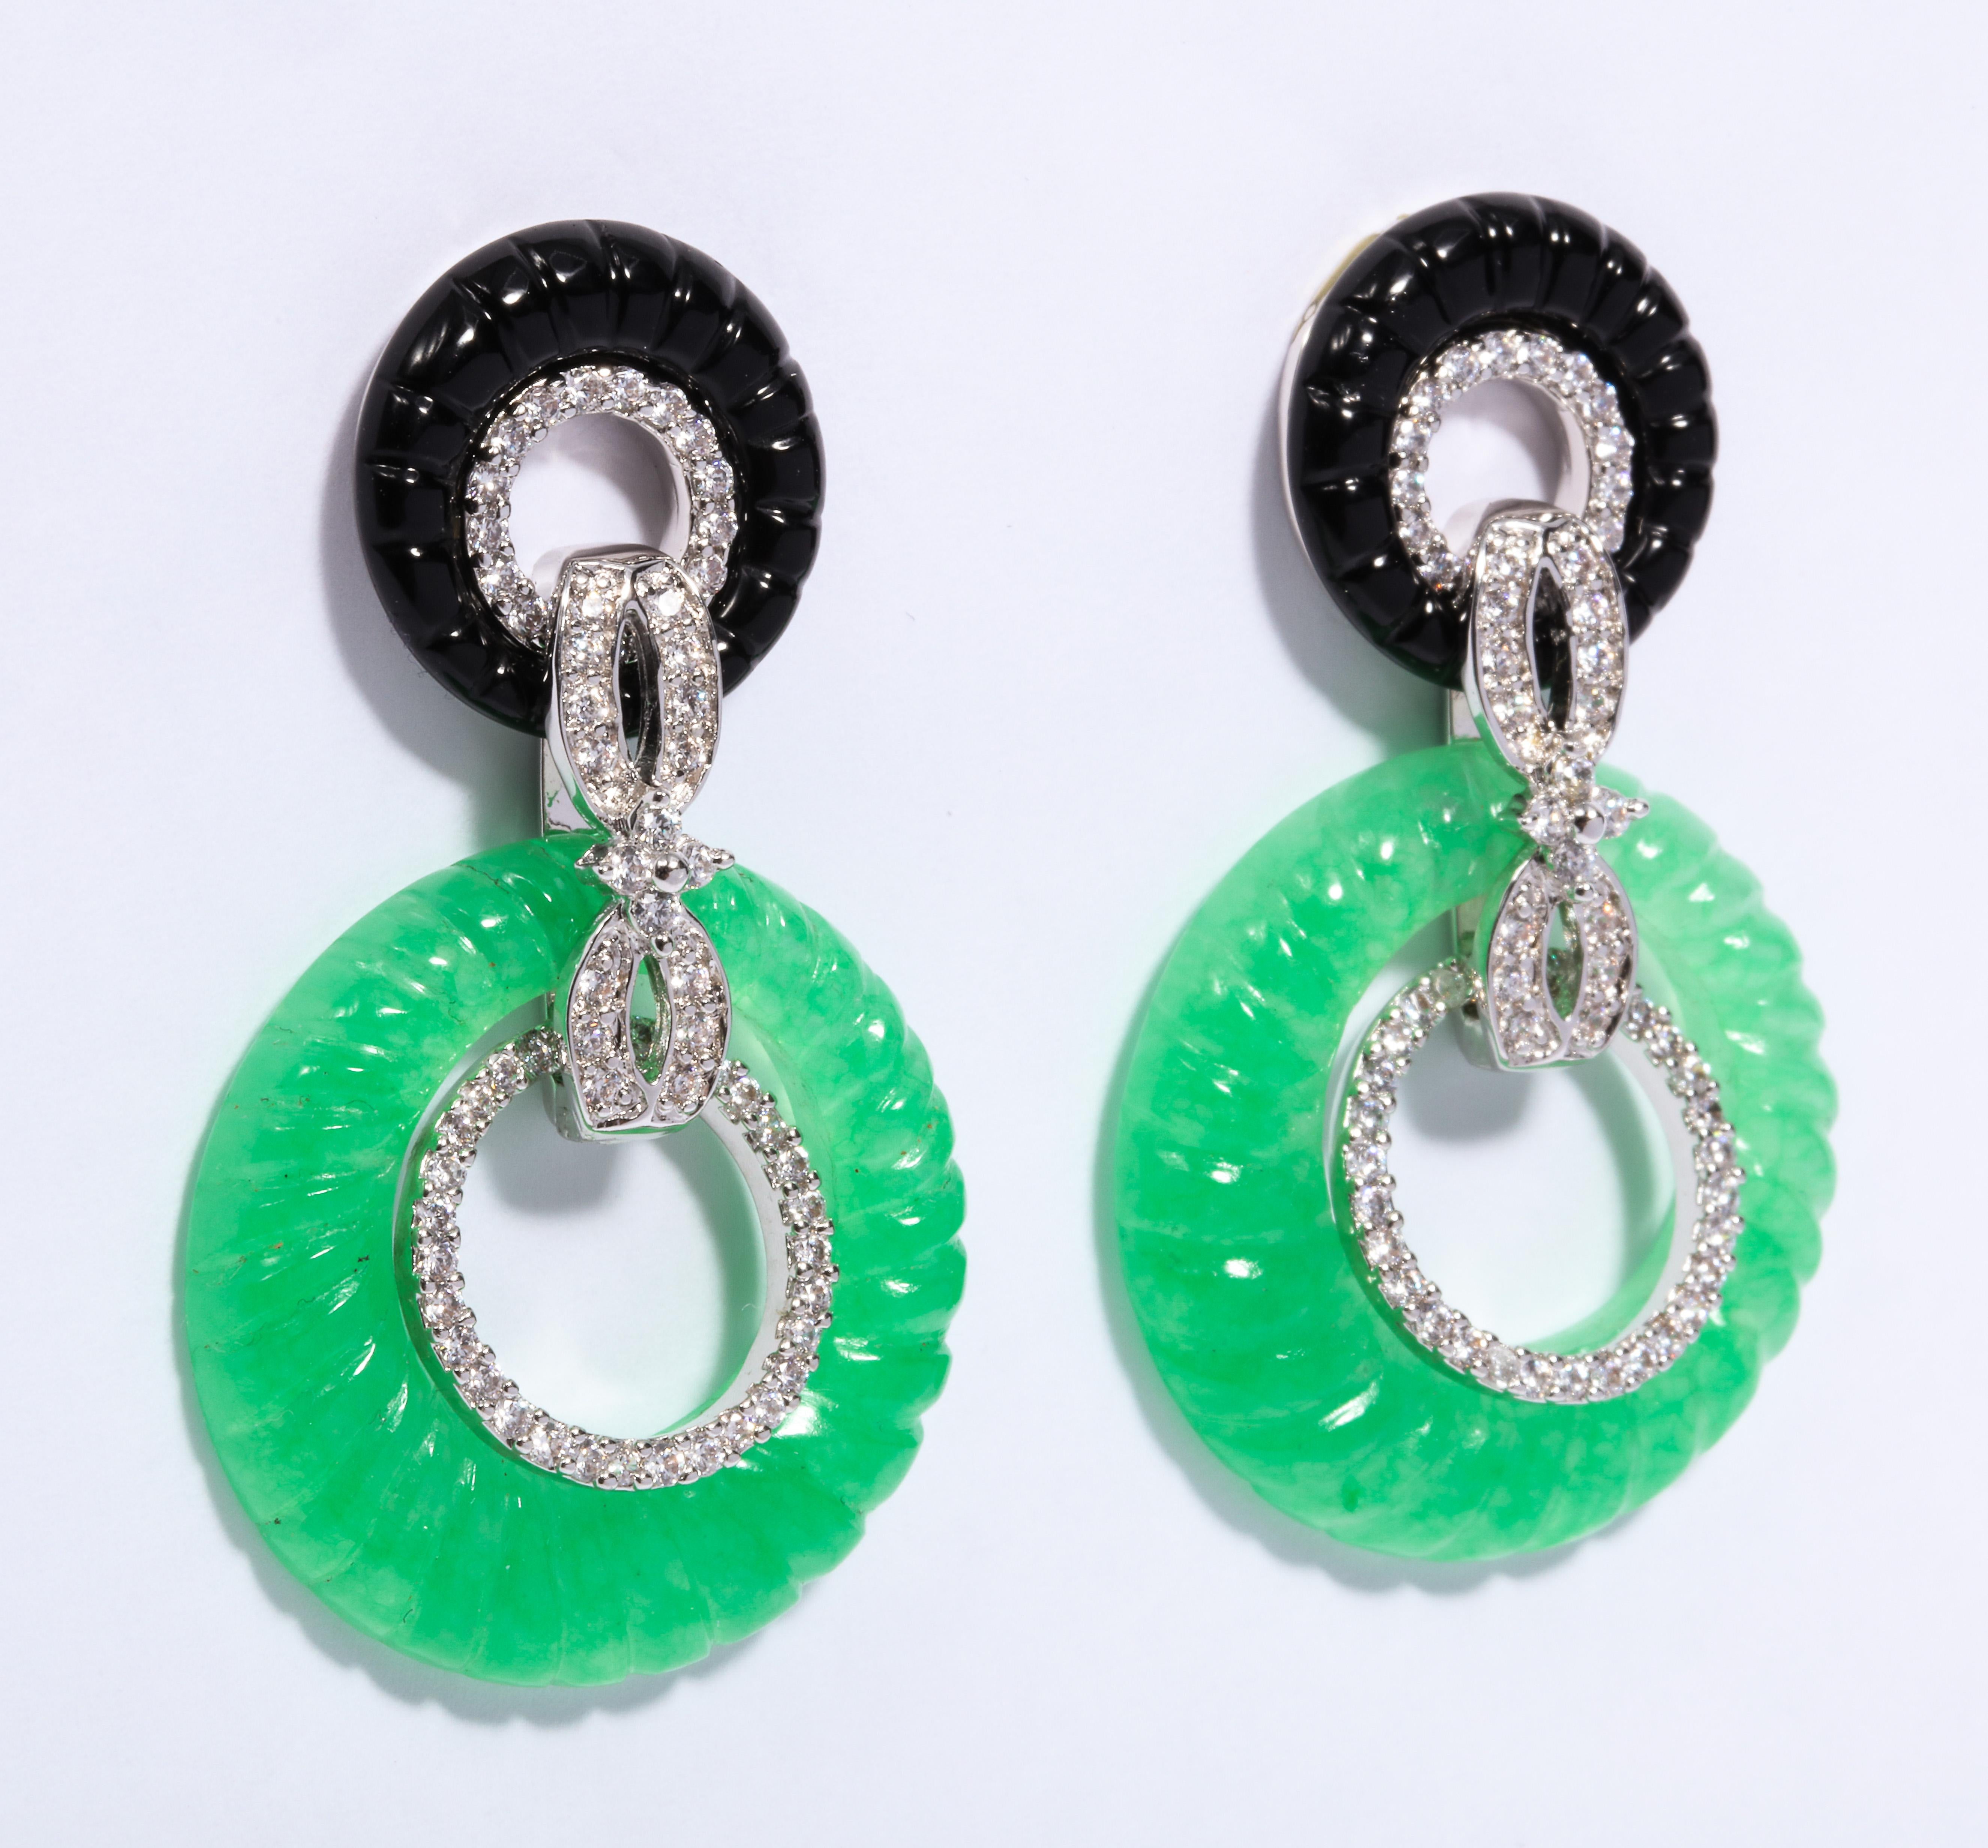 Magnificent Costume Jewelry Art Deco Style Faux Diamond Onyx Jade Resin Hoop Earrings post only 2 inches long by 1 inch wide.